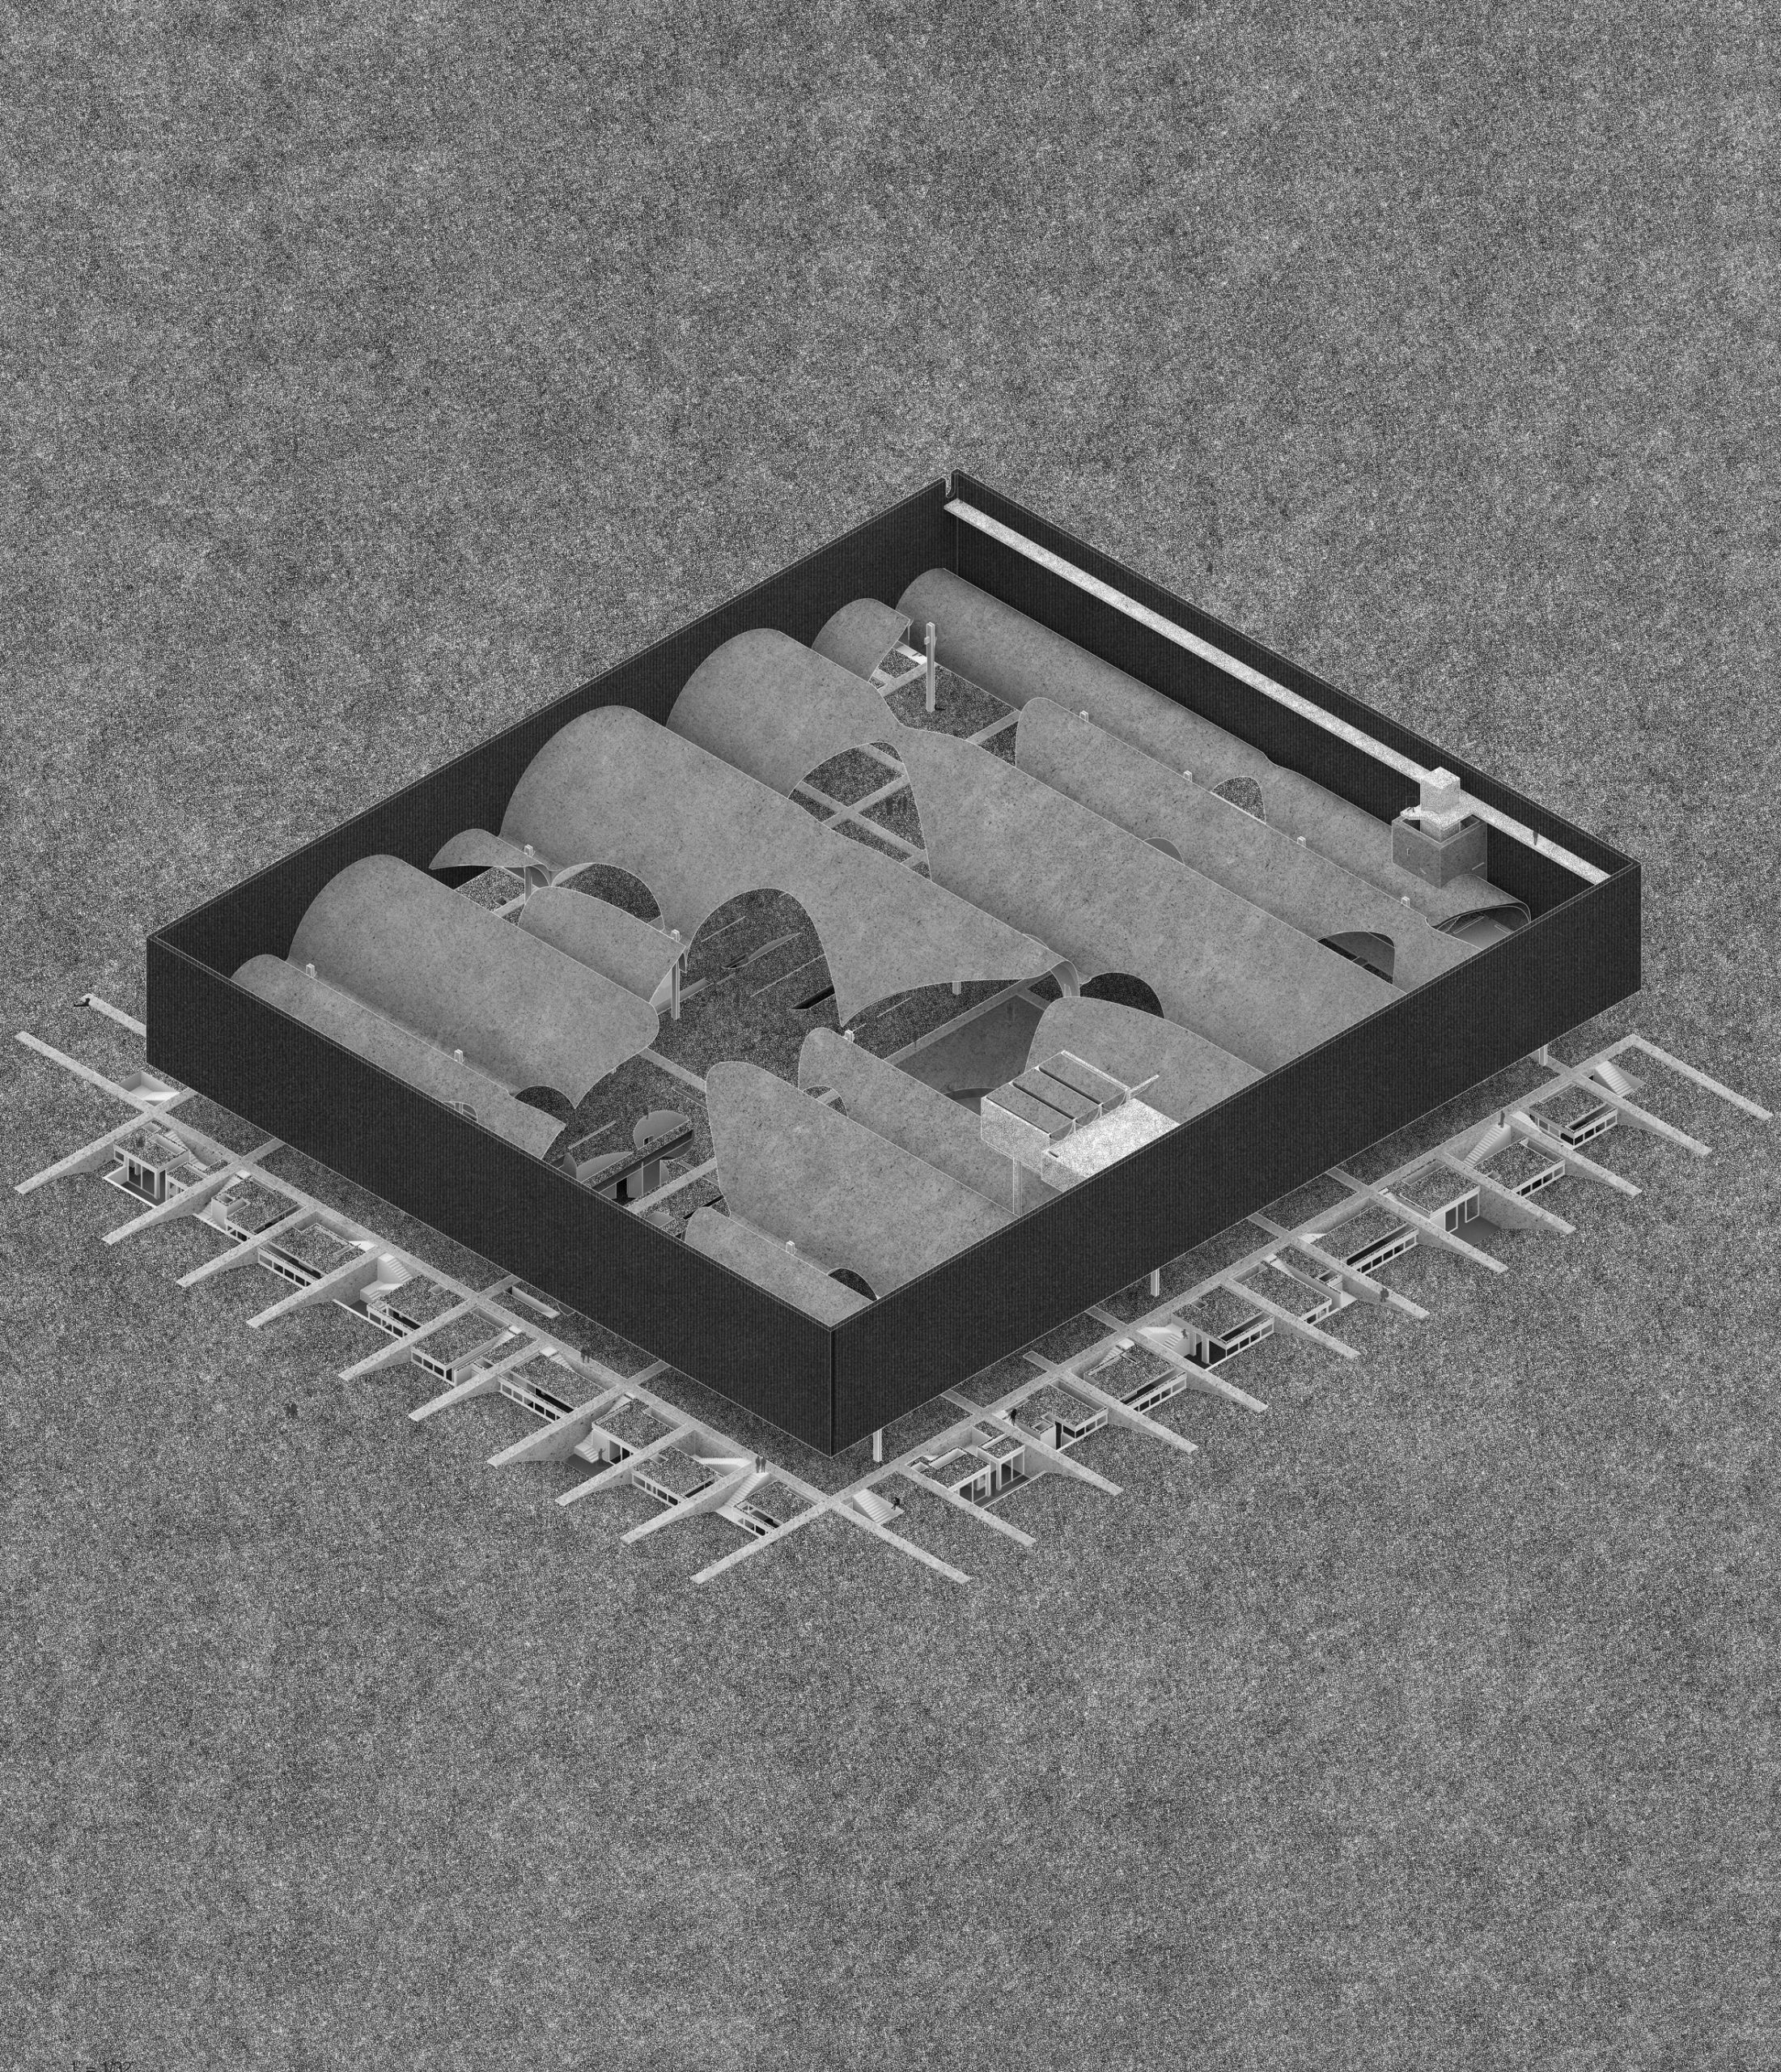 Greyscale drawing of motel structure